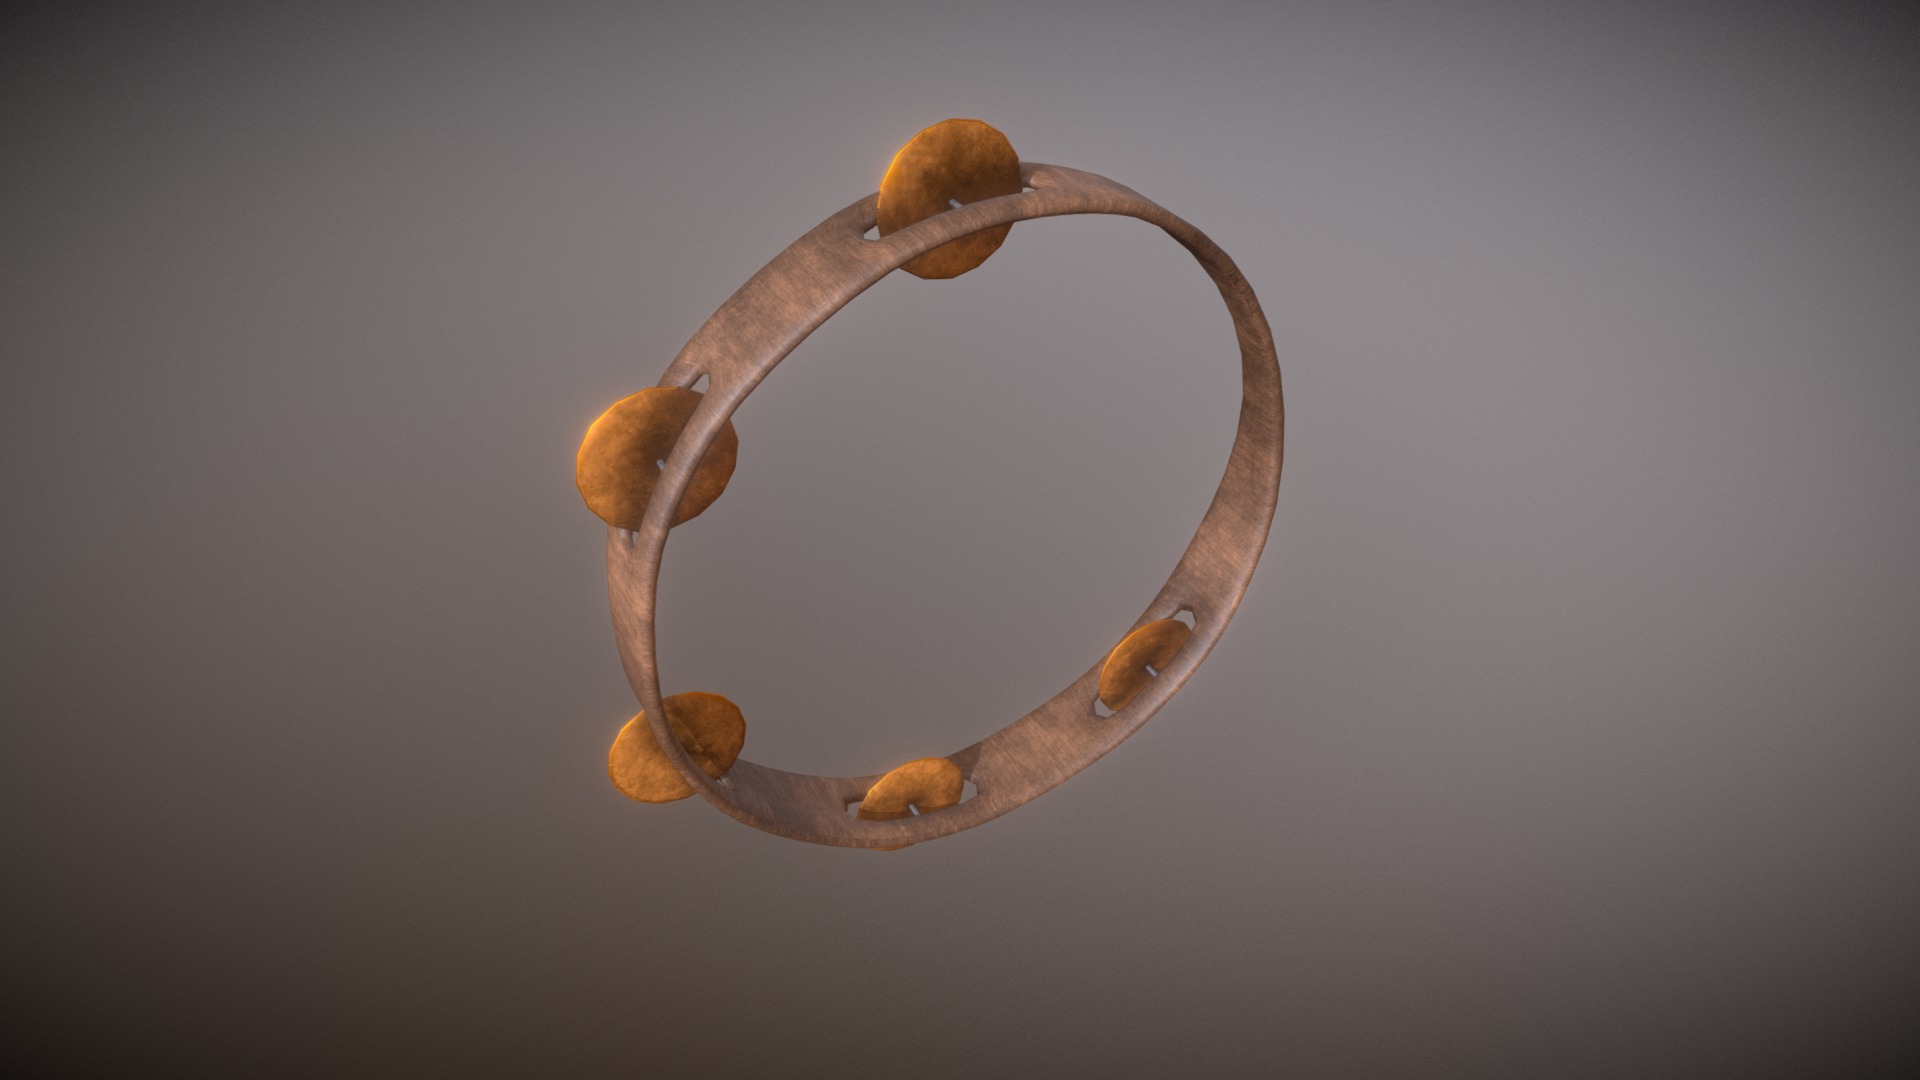 3D model Tambourine - This is a 3D model of the Tambourine. The 3D model is about a wooden spoon with oranges.